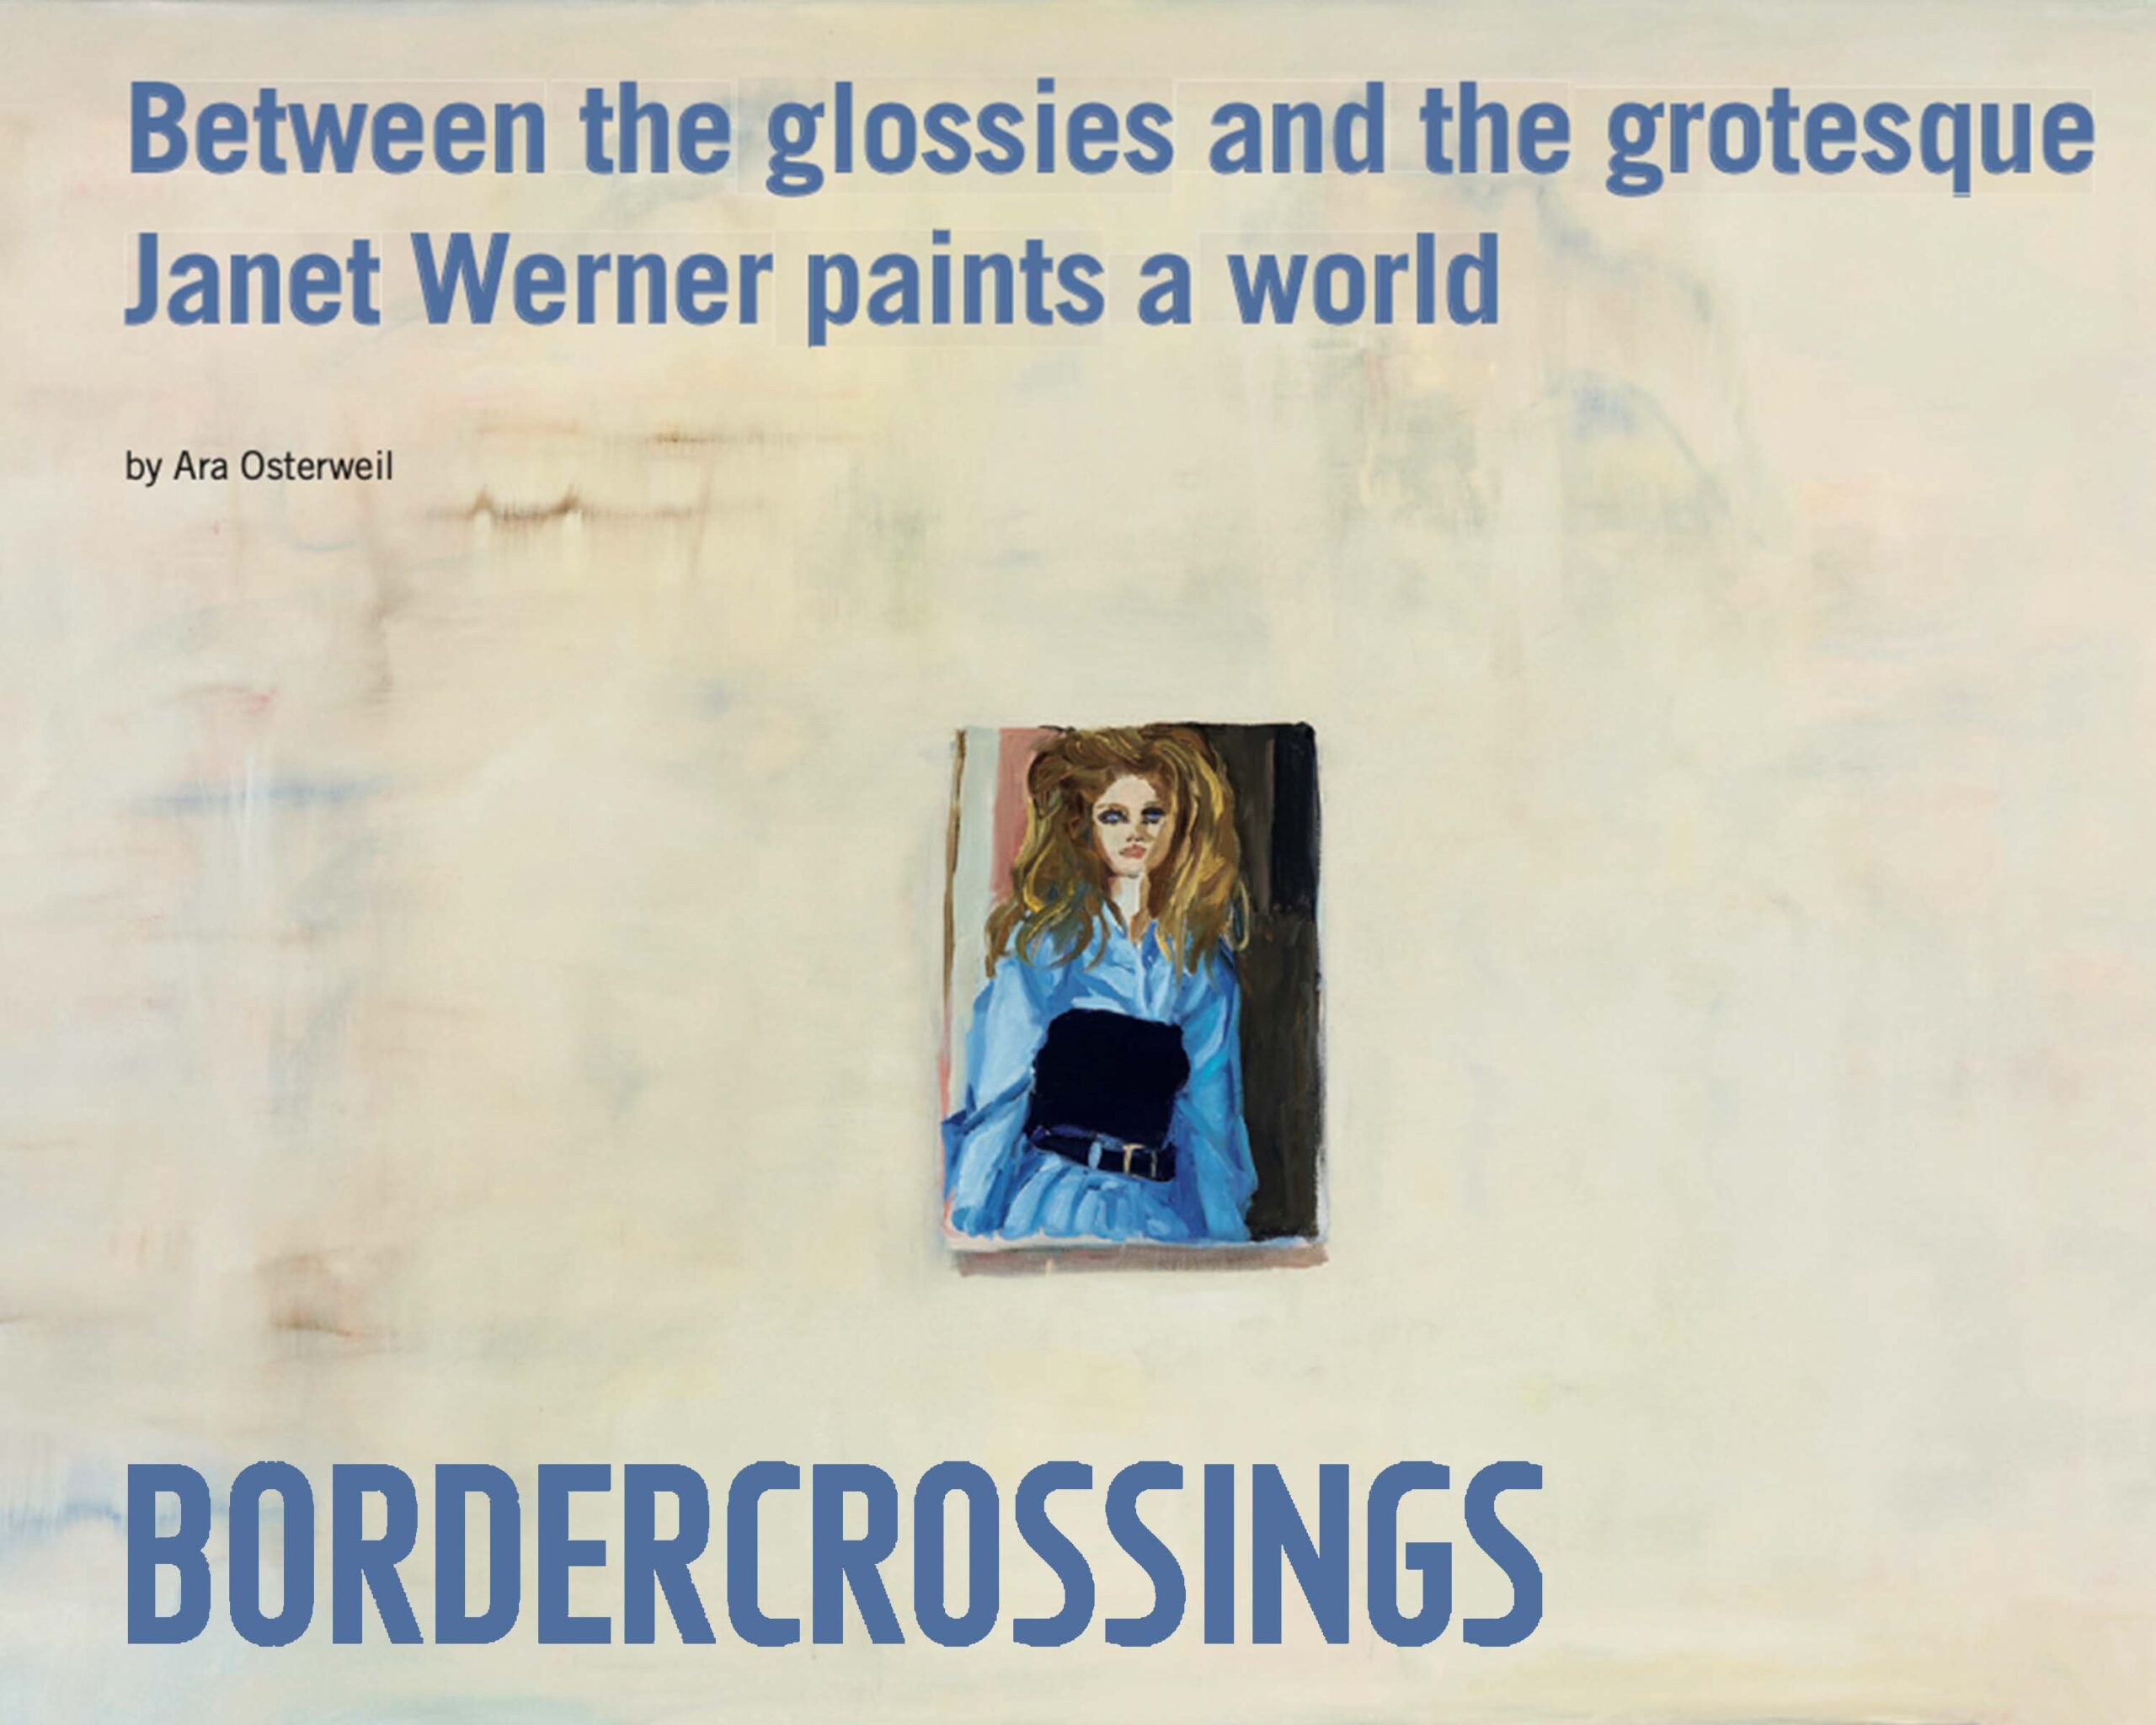 Border Crossings, 2020 | Between the glossies and the grotesque Janet Werner paints a world